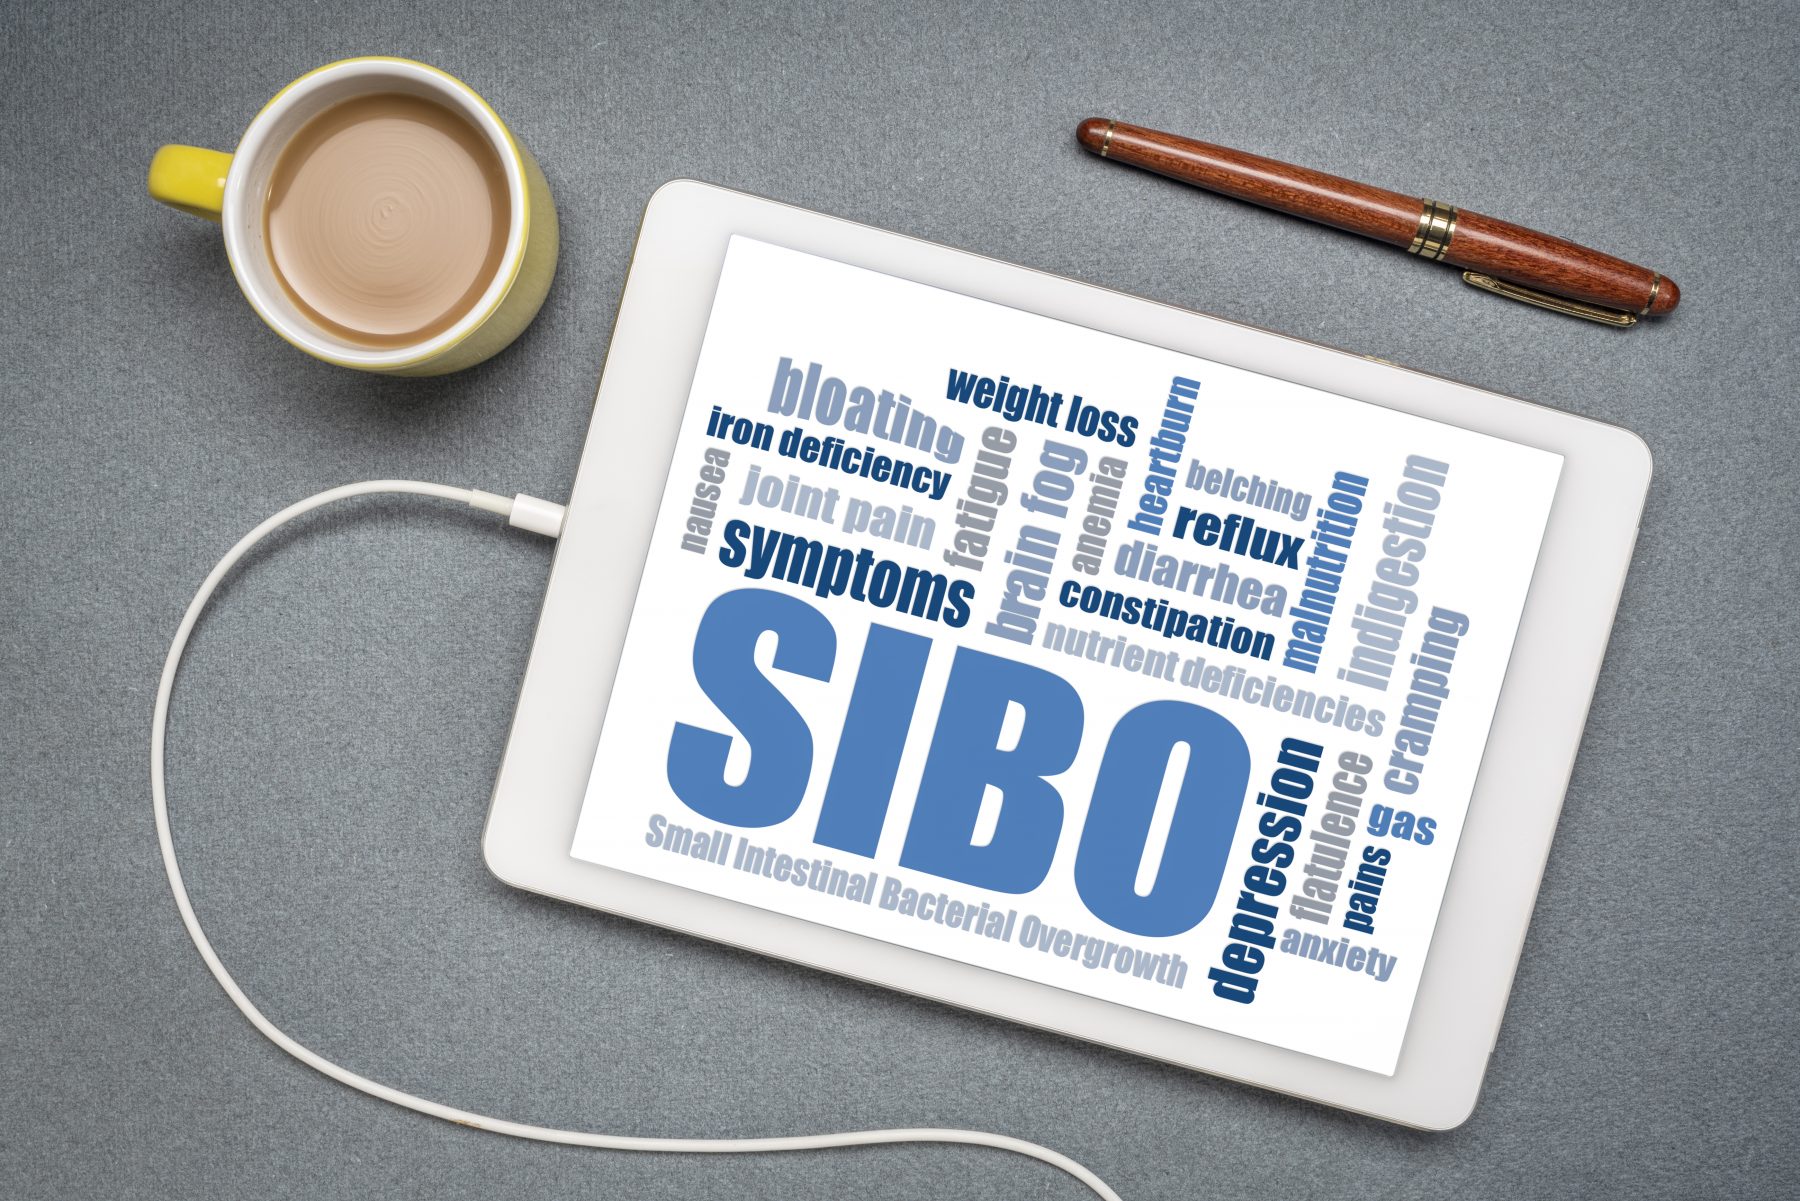 SIBO, small intestinal bacterial overgrowth word cloud